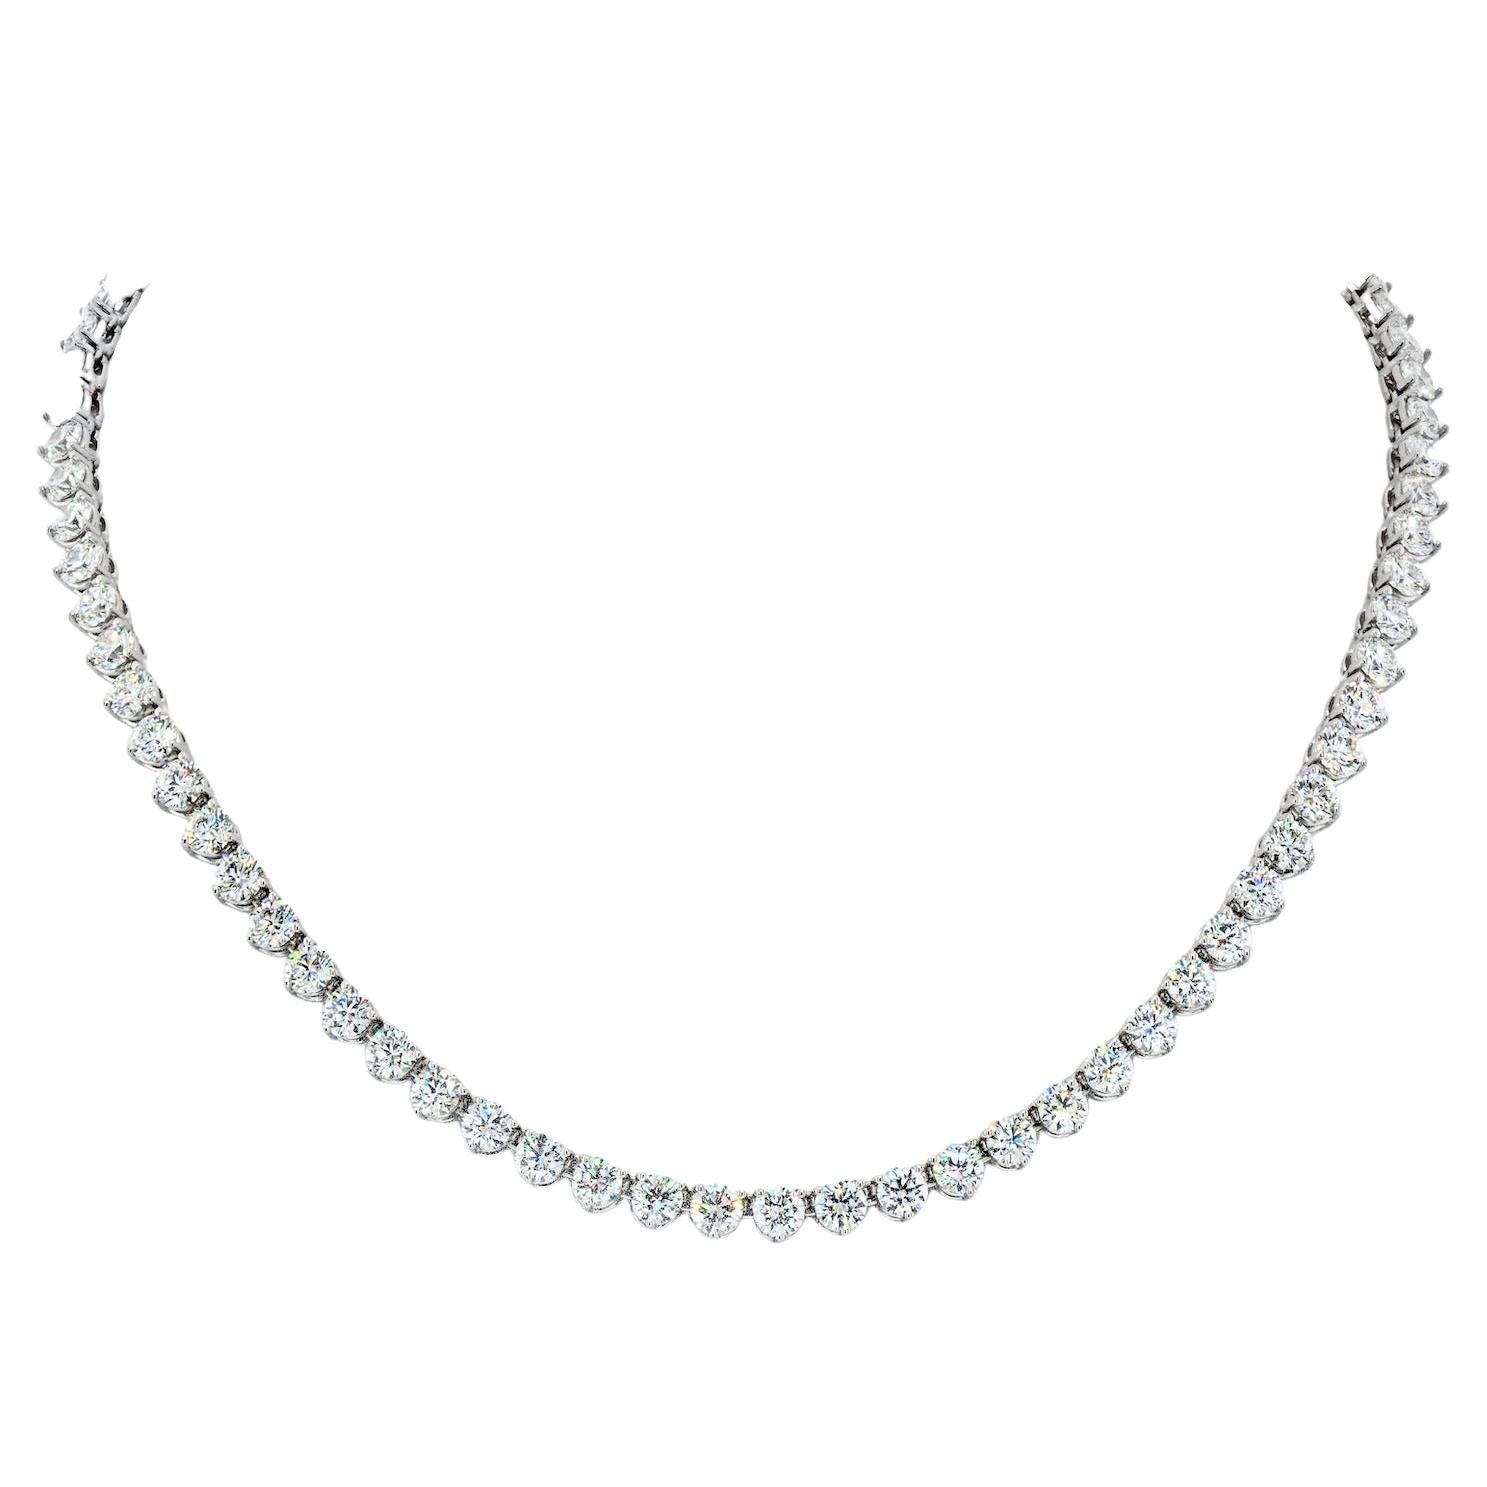 Louis Newman & Co GIA Diamond Straight Line Tennis Necklace with 30.53 Carats